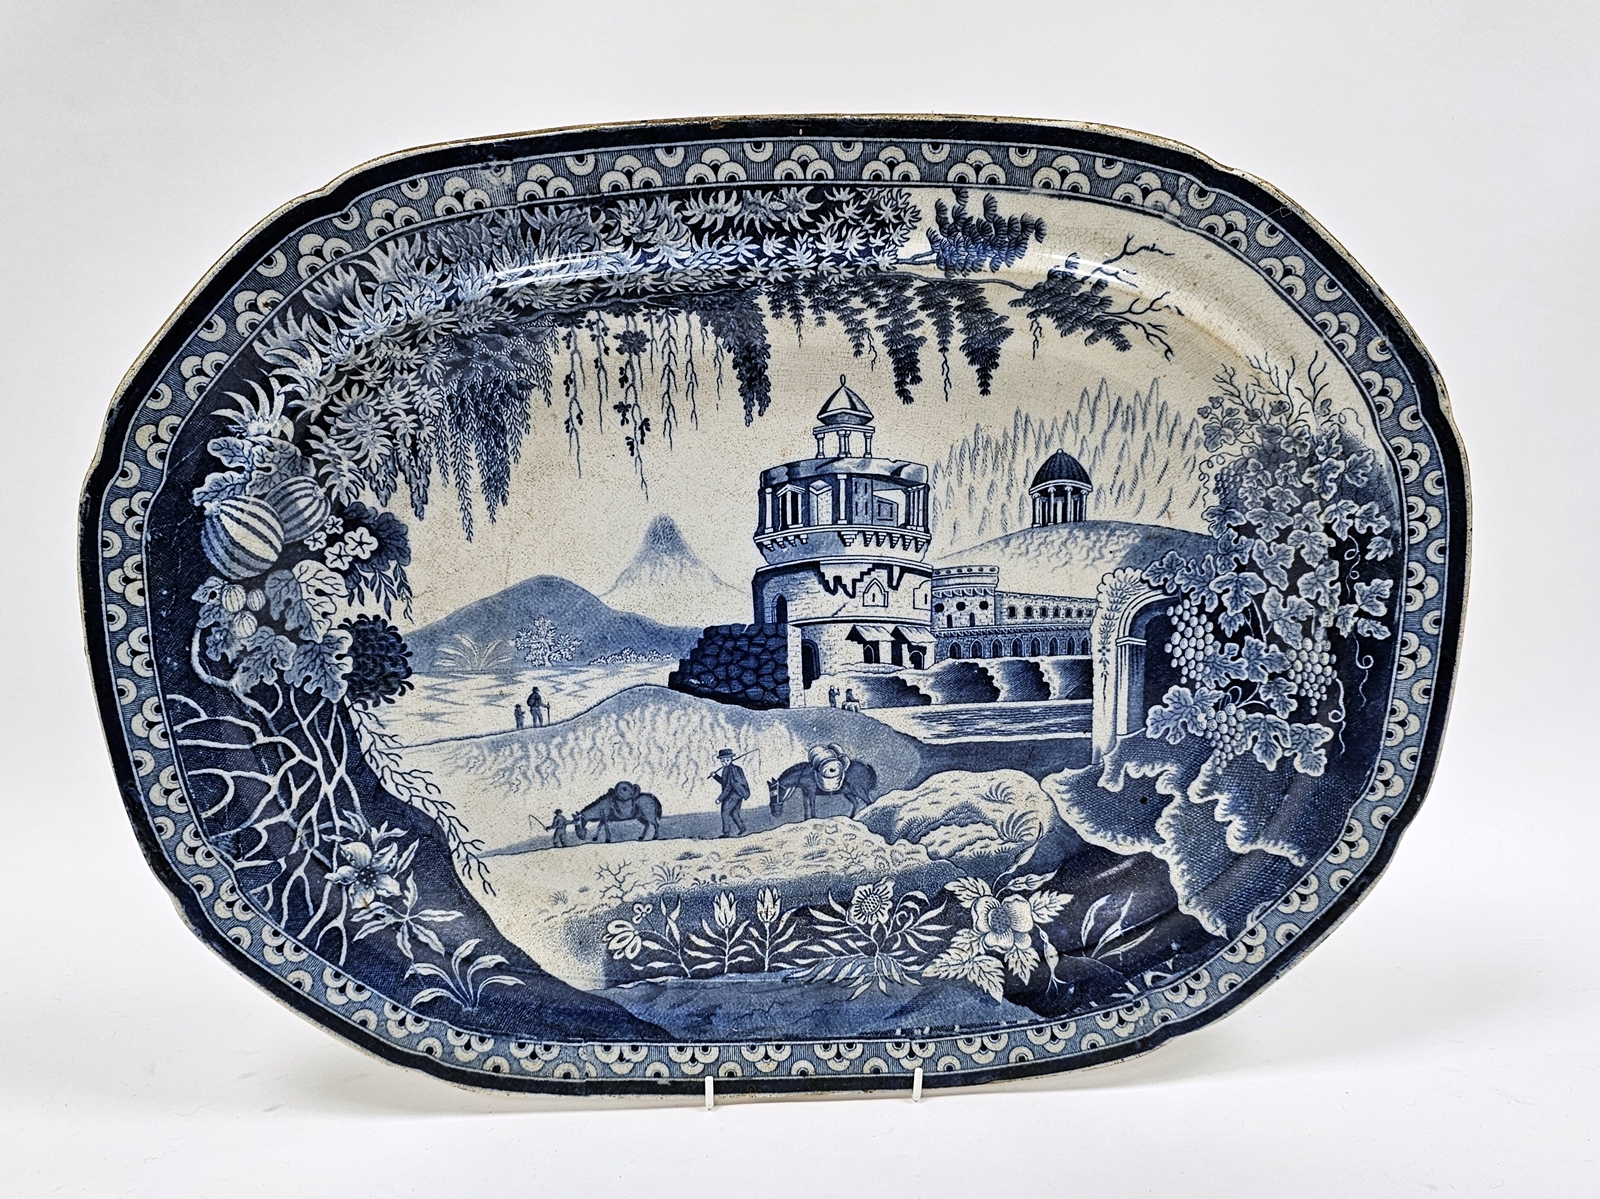 English pearlware shaped rectangular transfer-printed blue and white meat dish, early 19th